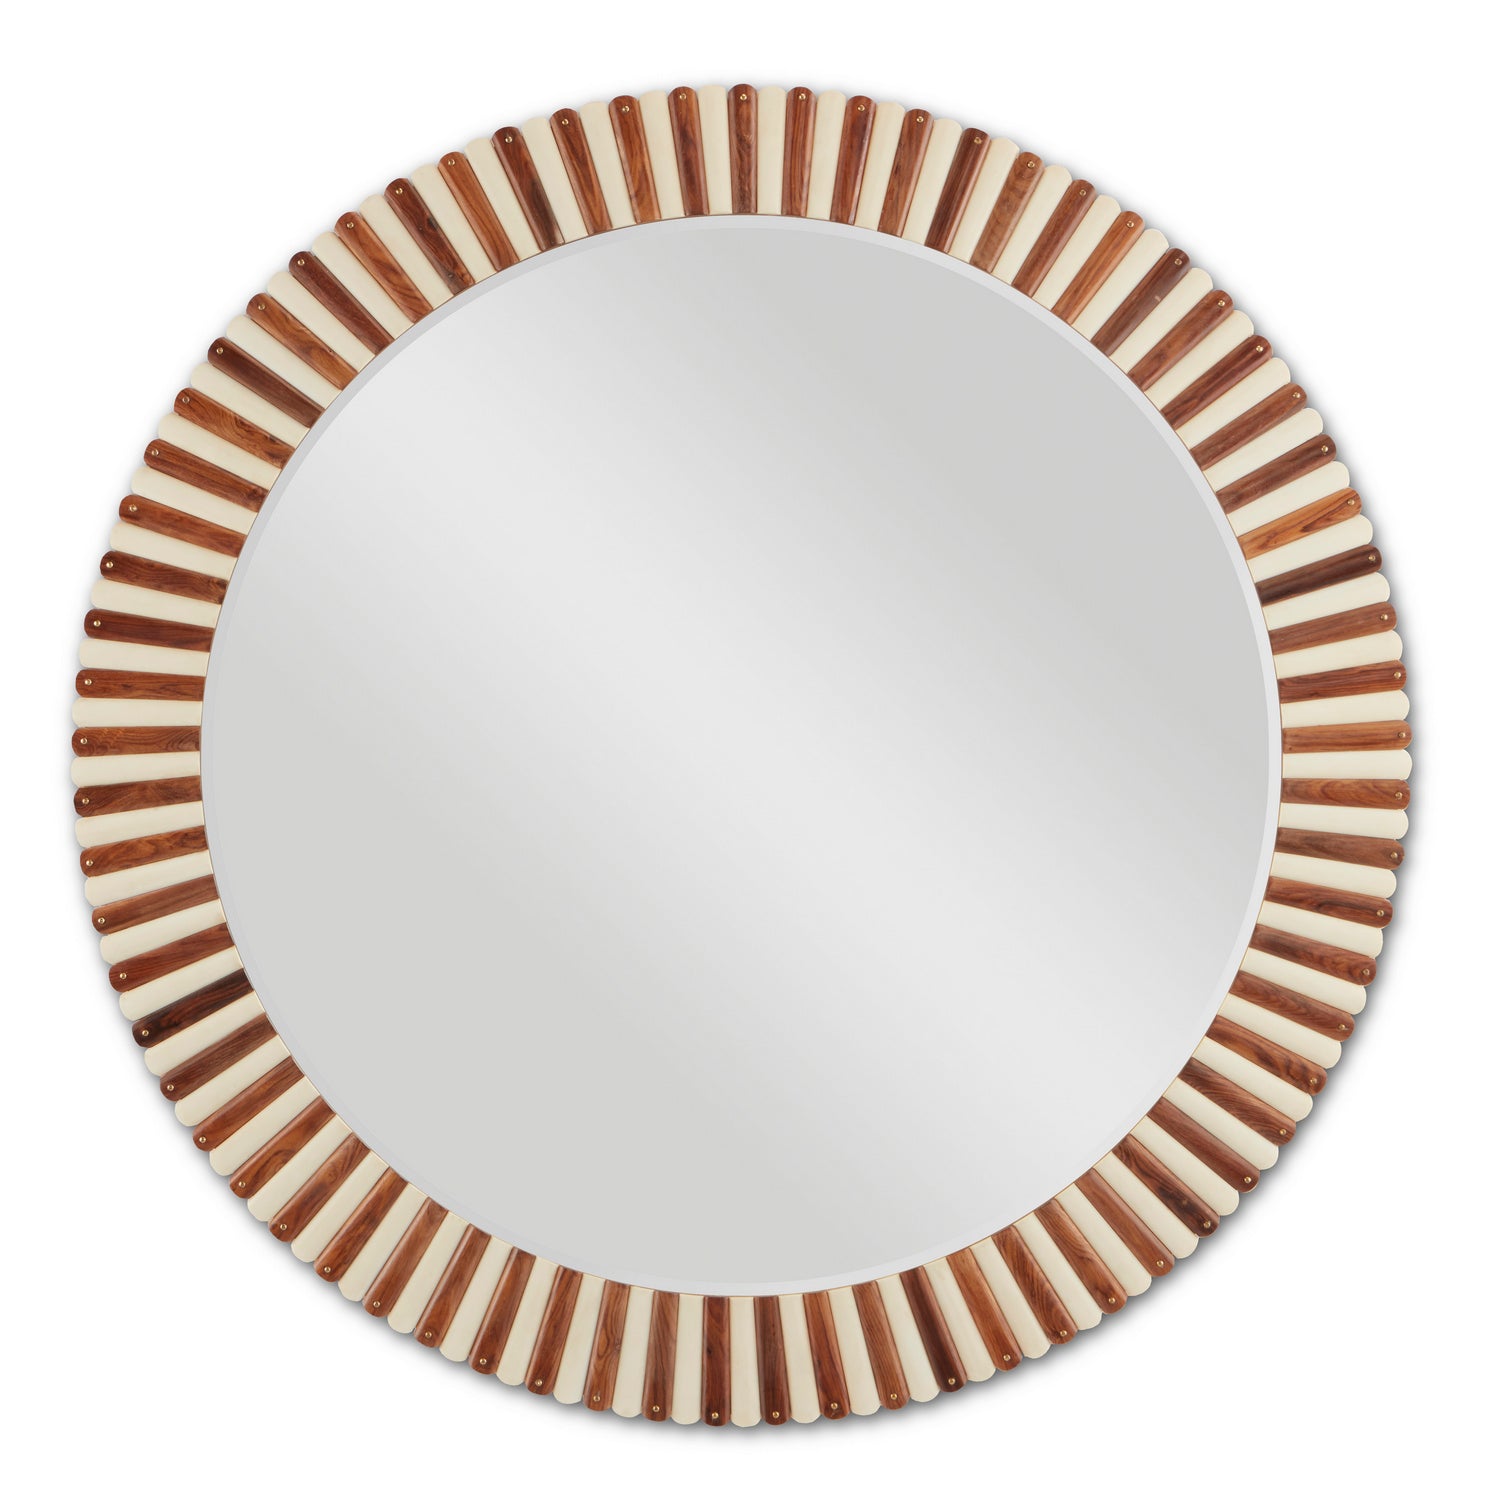 Mirror from the Muse collection in Natural/Ivory/Brass/Mirror finish